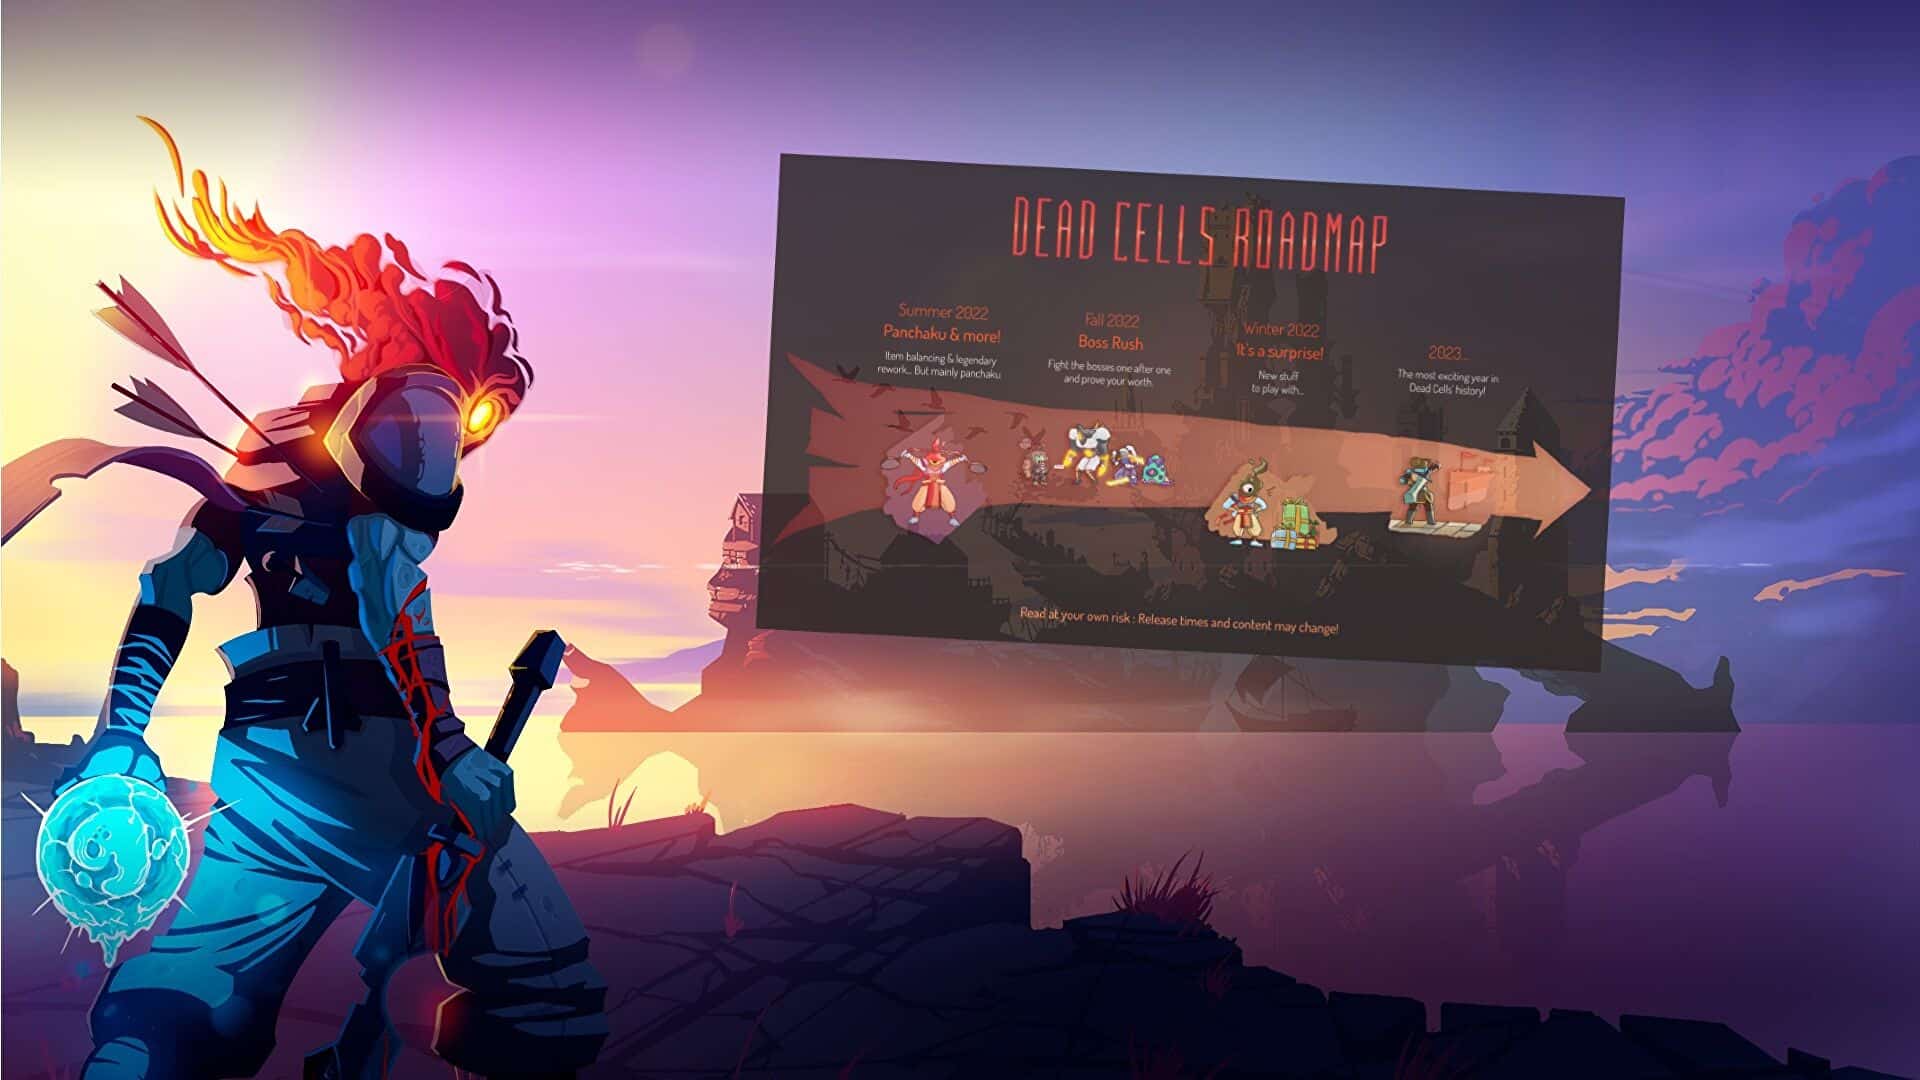 Dead Cells team say the game isn't dead yet and set out roadmap for 2022